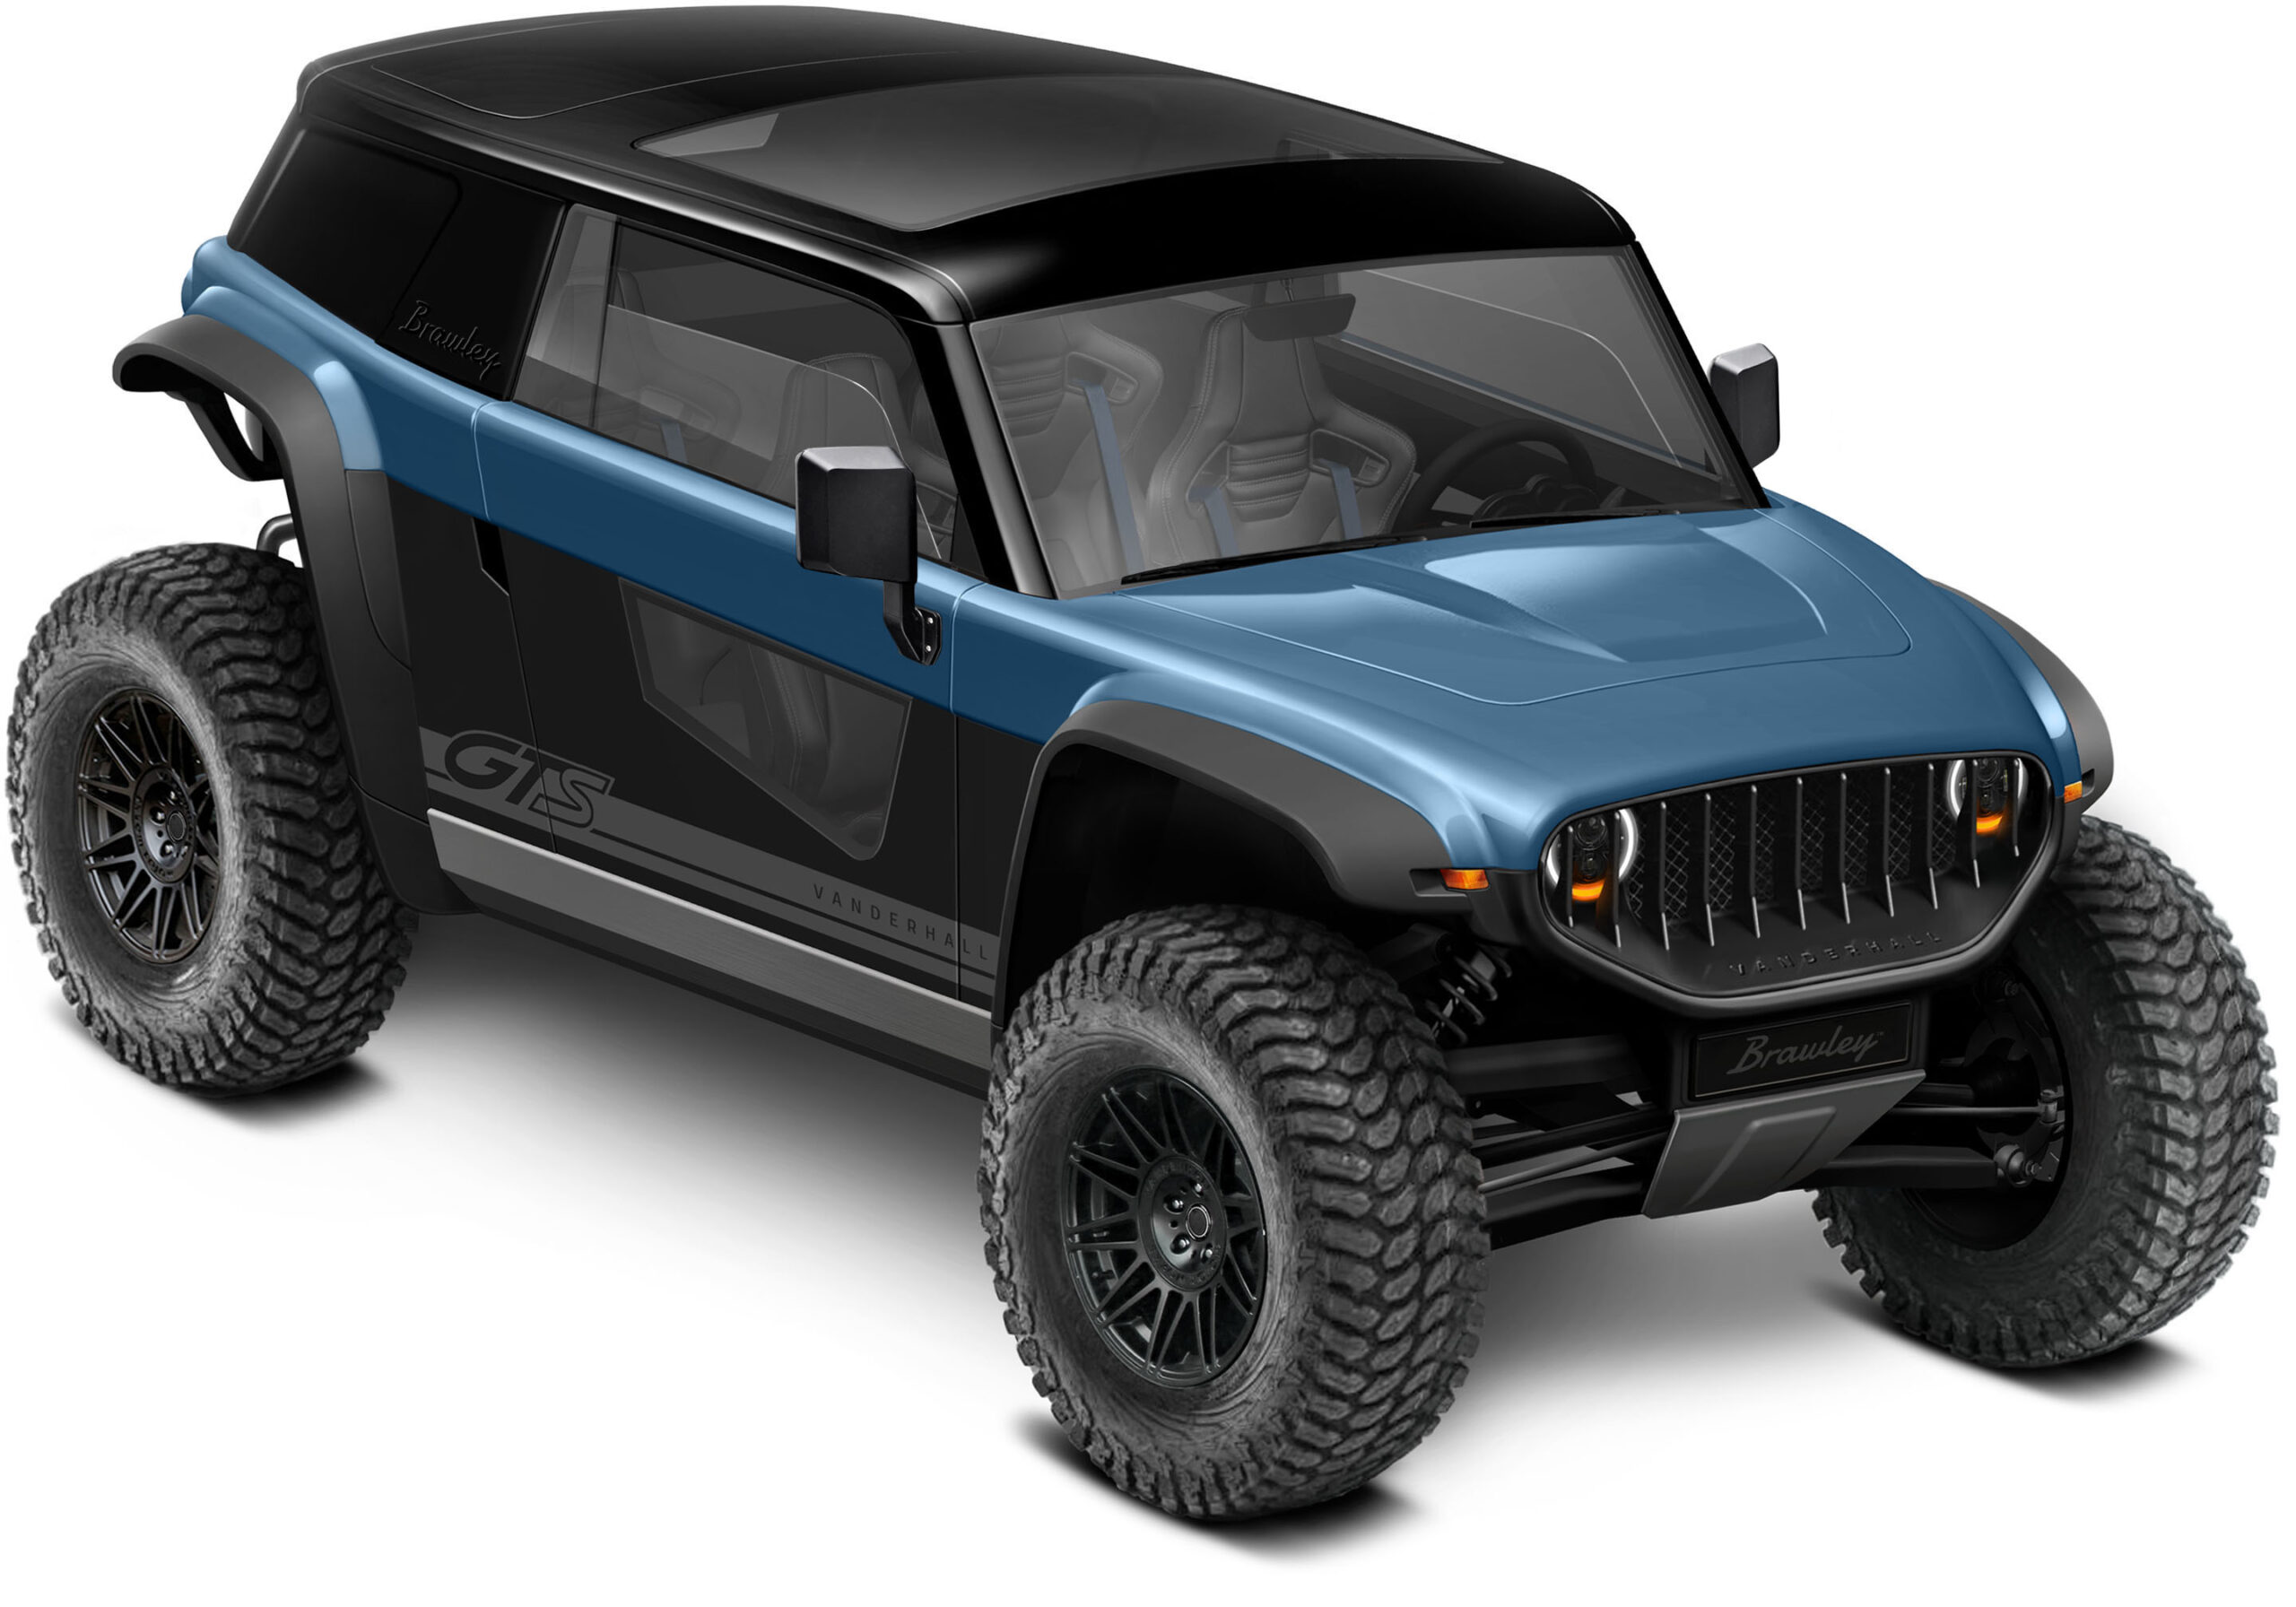 How to Build or Buy a Bug Out Vehicle | Suburban Survival Blog | Vanderhall Brawley